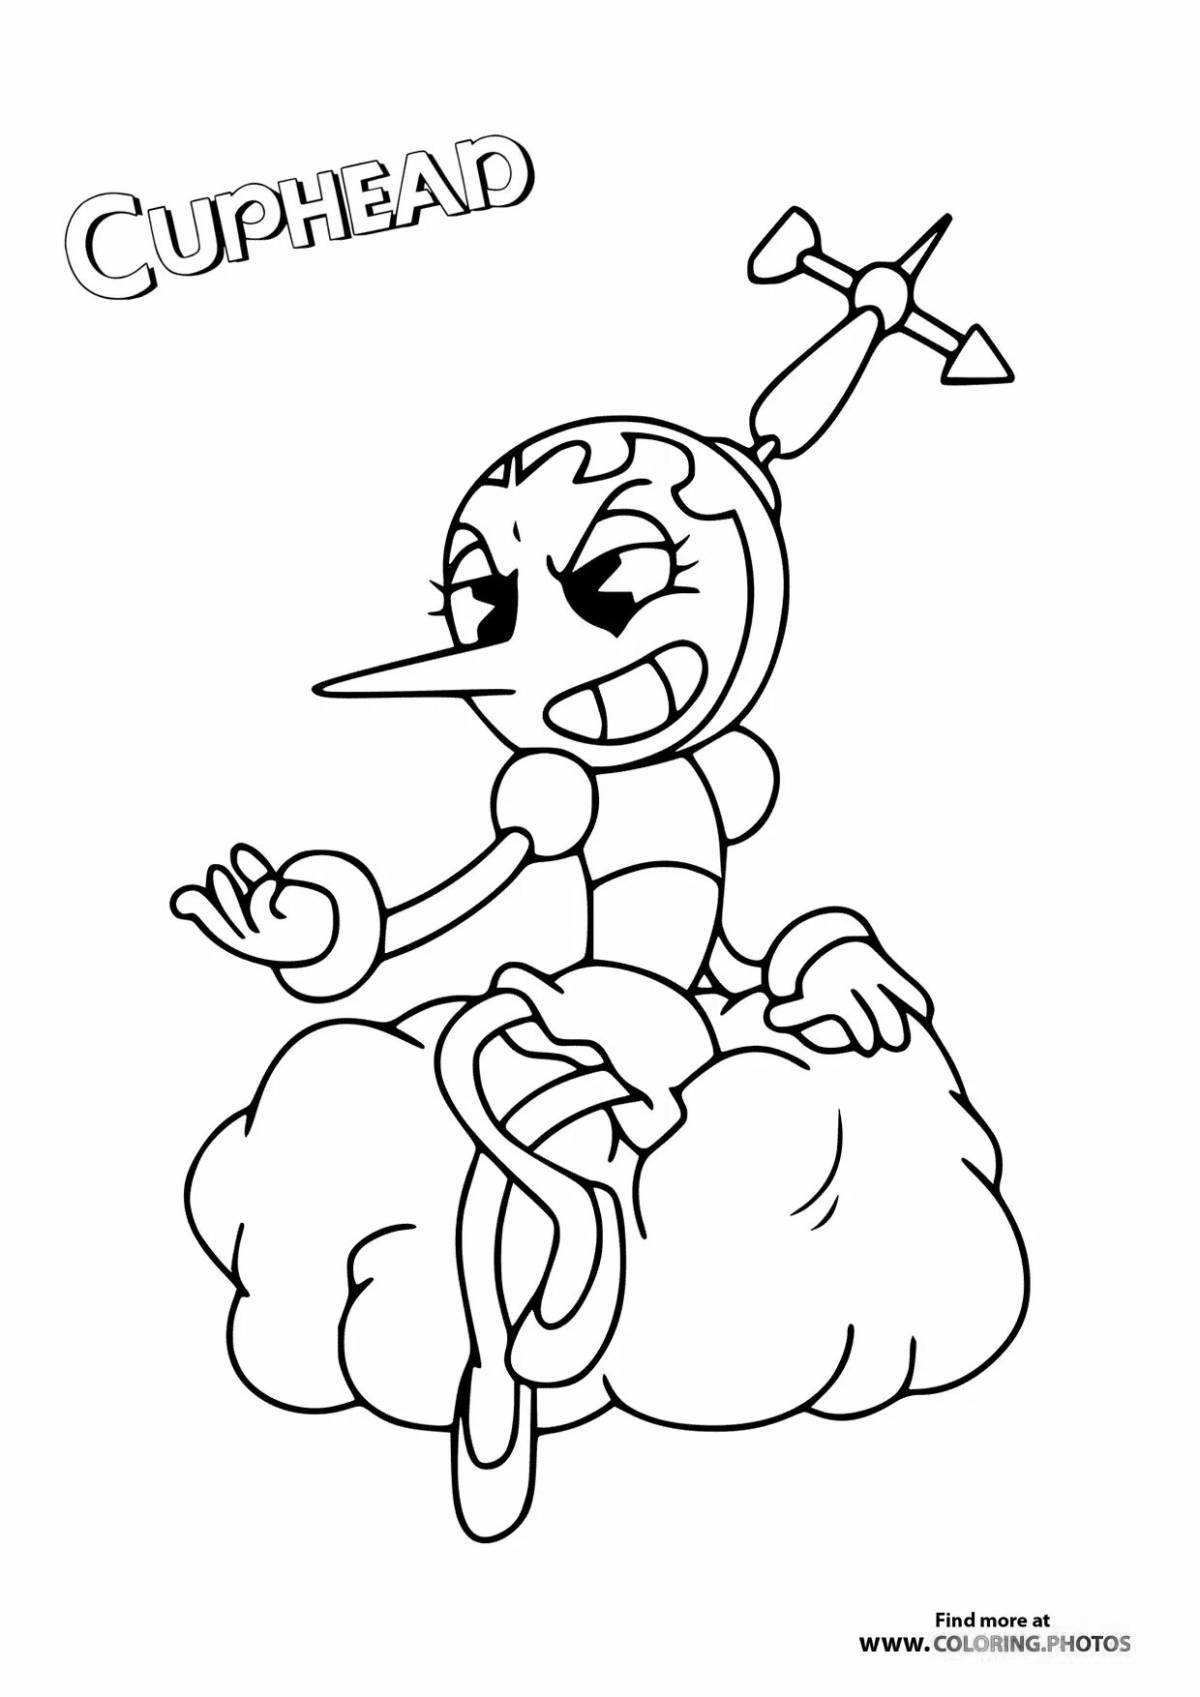 Radiant cuphead boss coloring page